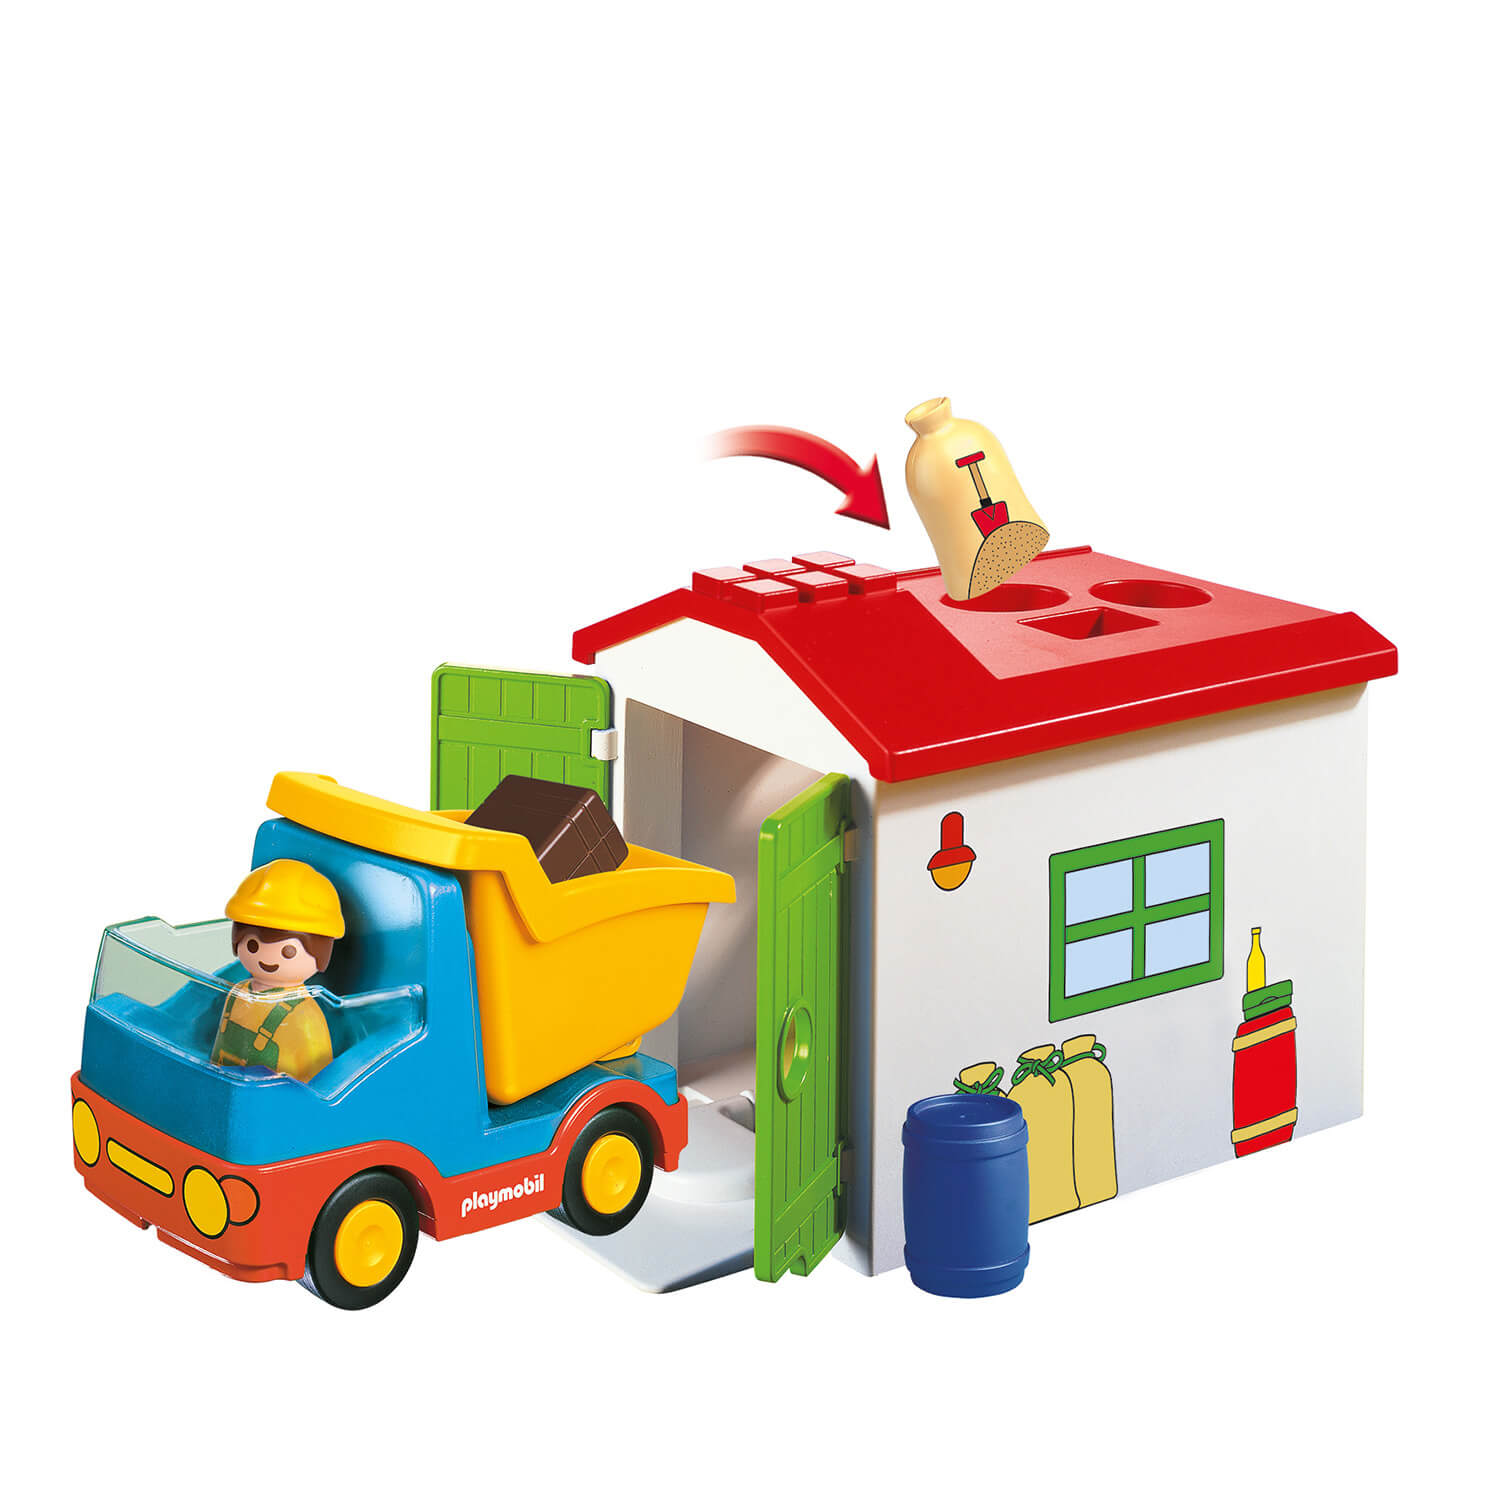 PLAYMOBIL 1.2.3 Construction Truck with Garage (70184)